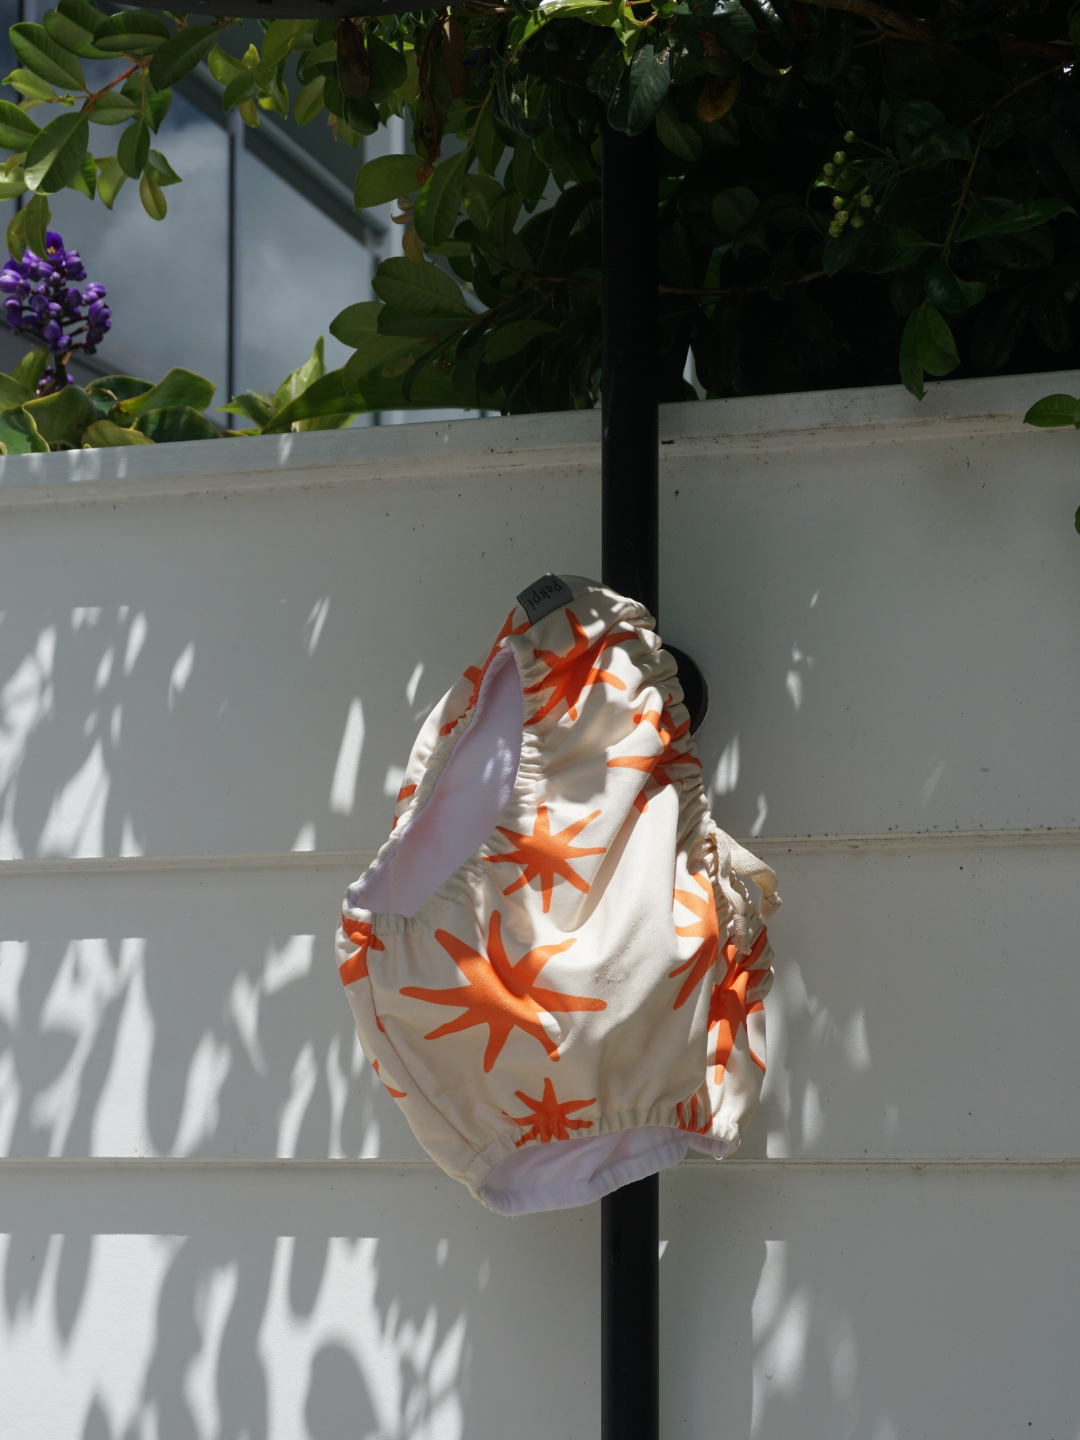 The swim diaper has an elastic waist with a tie and elastic leg holes. The diaper is a cream color with orange stars shapes all over. It is hanging on an outdoor shower in the sunlight.